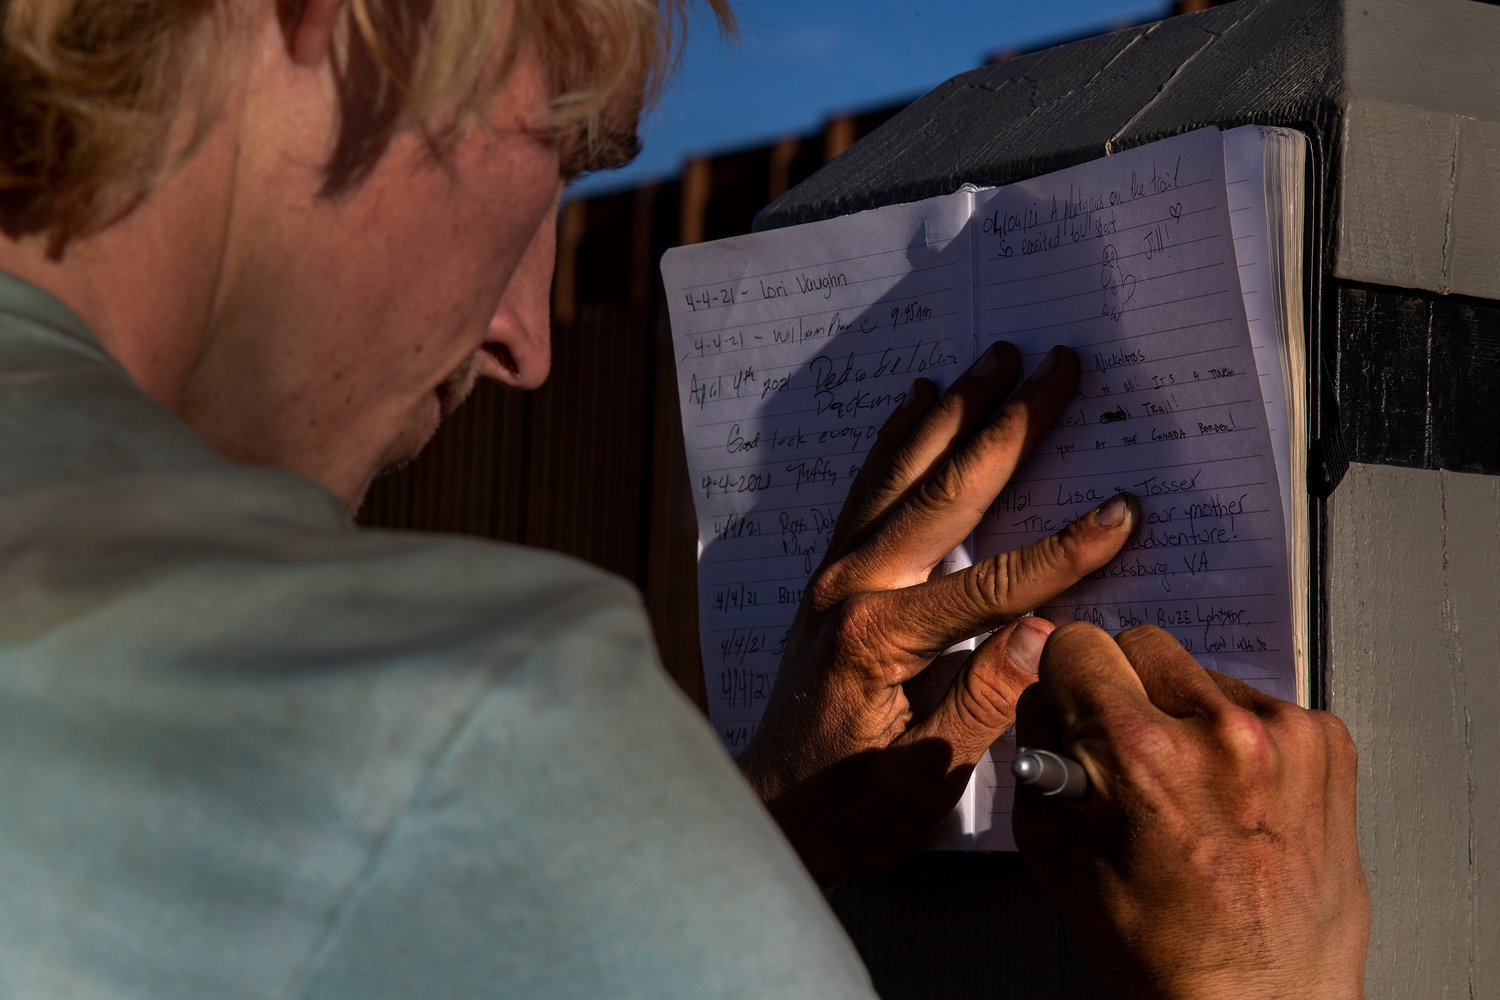 Stanford student Jackson Parell signs the Pacific Crest Trail log book as he reaches the Pacific Crest Trail Southern Terminus with hiking partner Sammy Potter at the Mexican border after a 12-day, 342-mile hike, on April 4, 2021, in Campo, California. (Gina Ferazzi/Los Angeles Times/TNS)